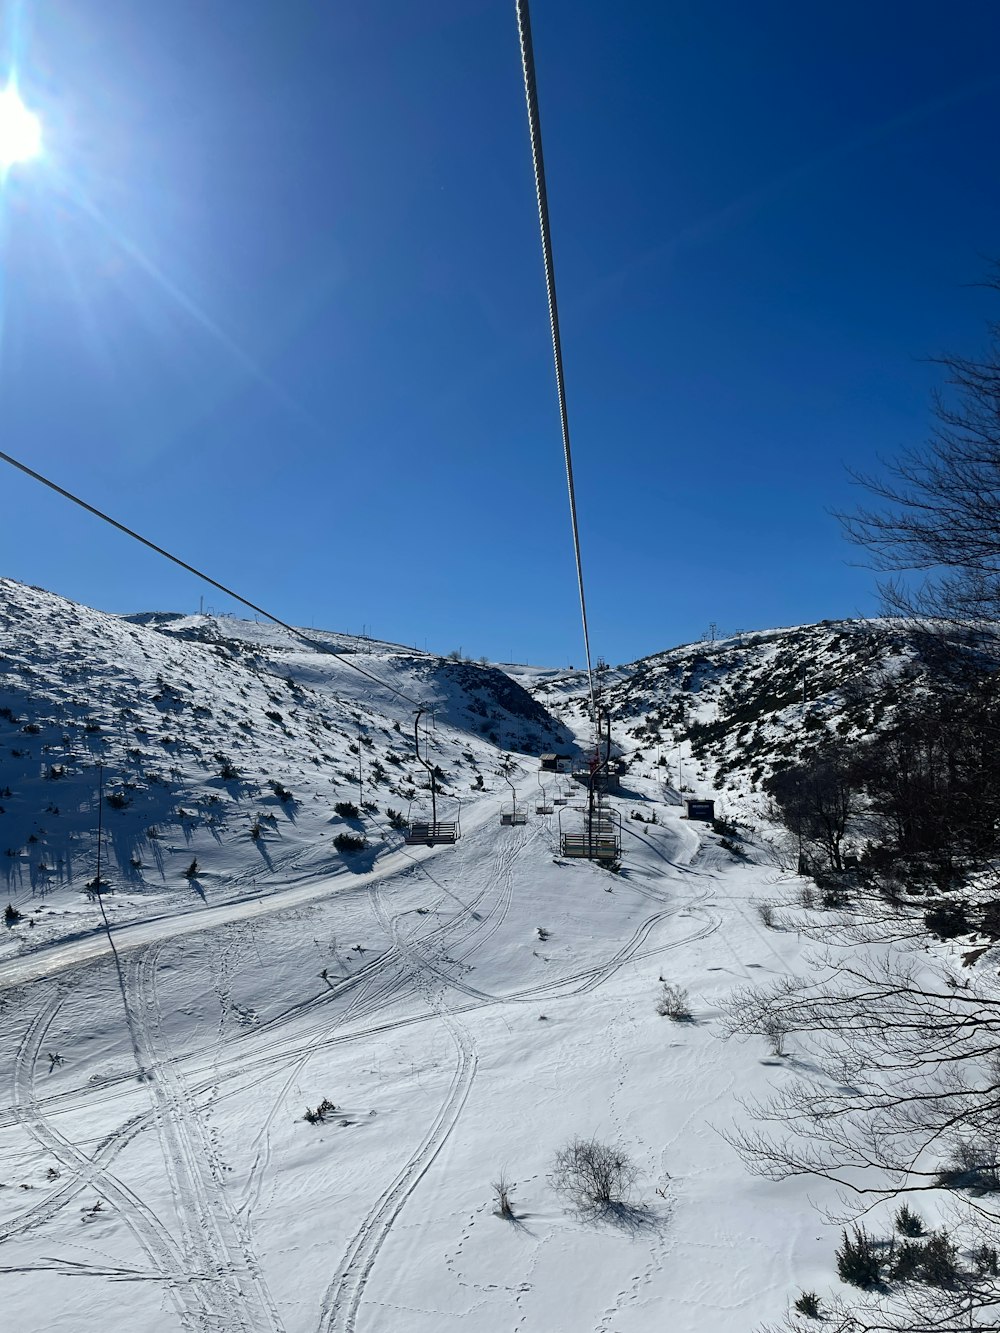 a ski lift going up a snowy hill